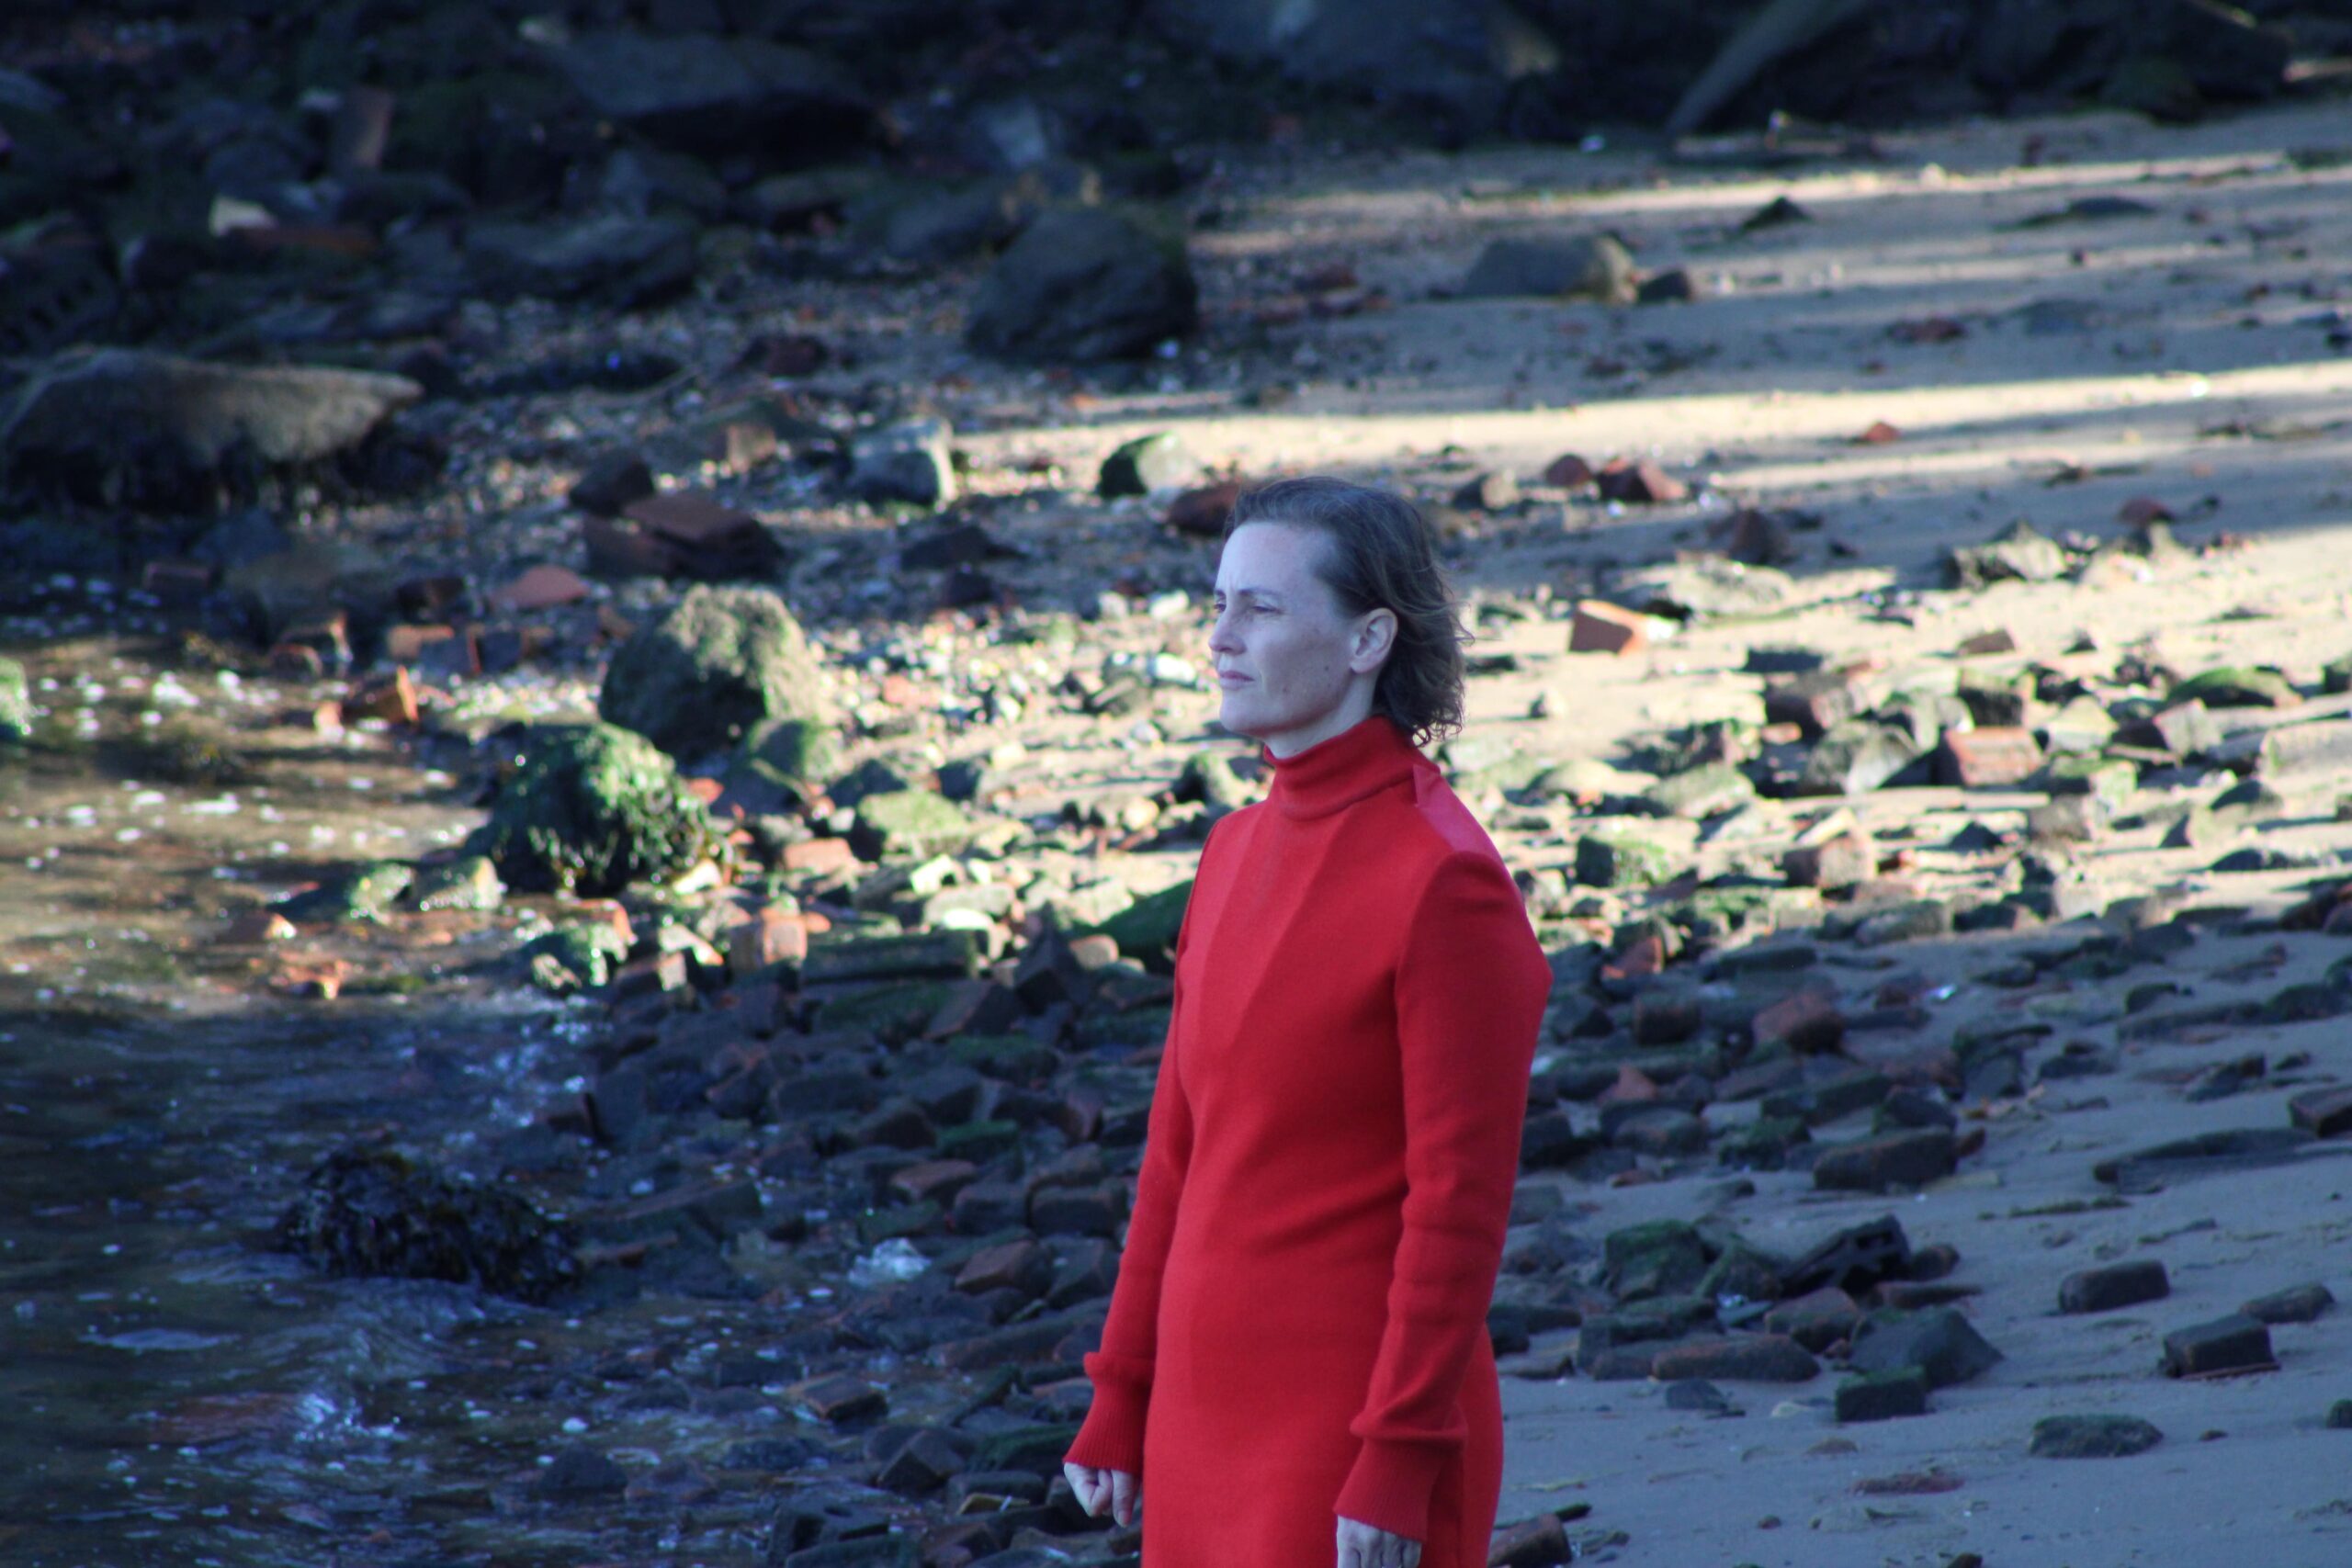 A photograph of the activist/artist Sarah Cameron Sunde in a red wind breaker, standing on the beach in her climate change performance.